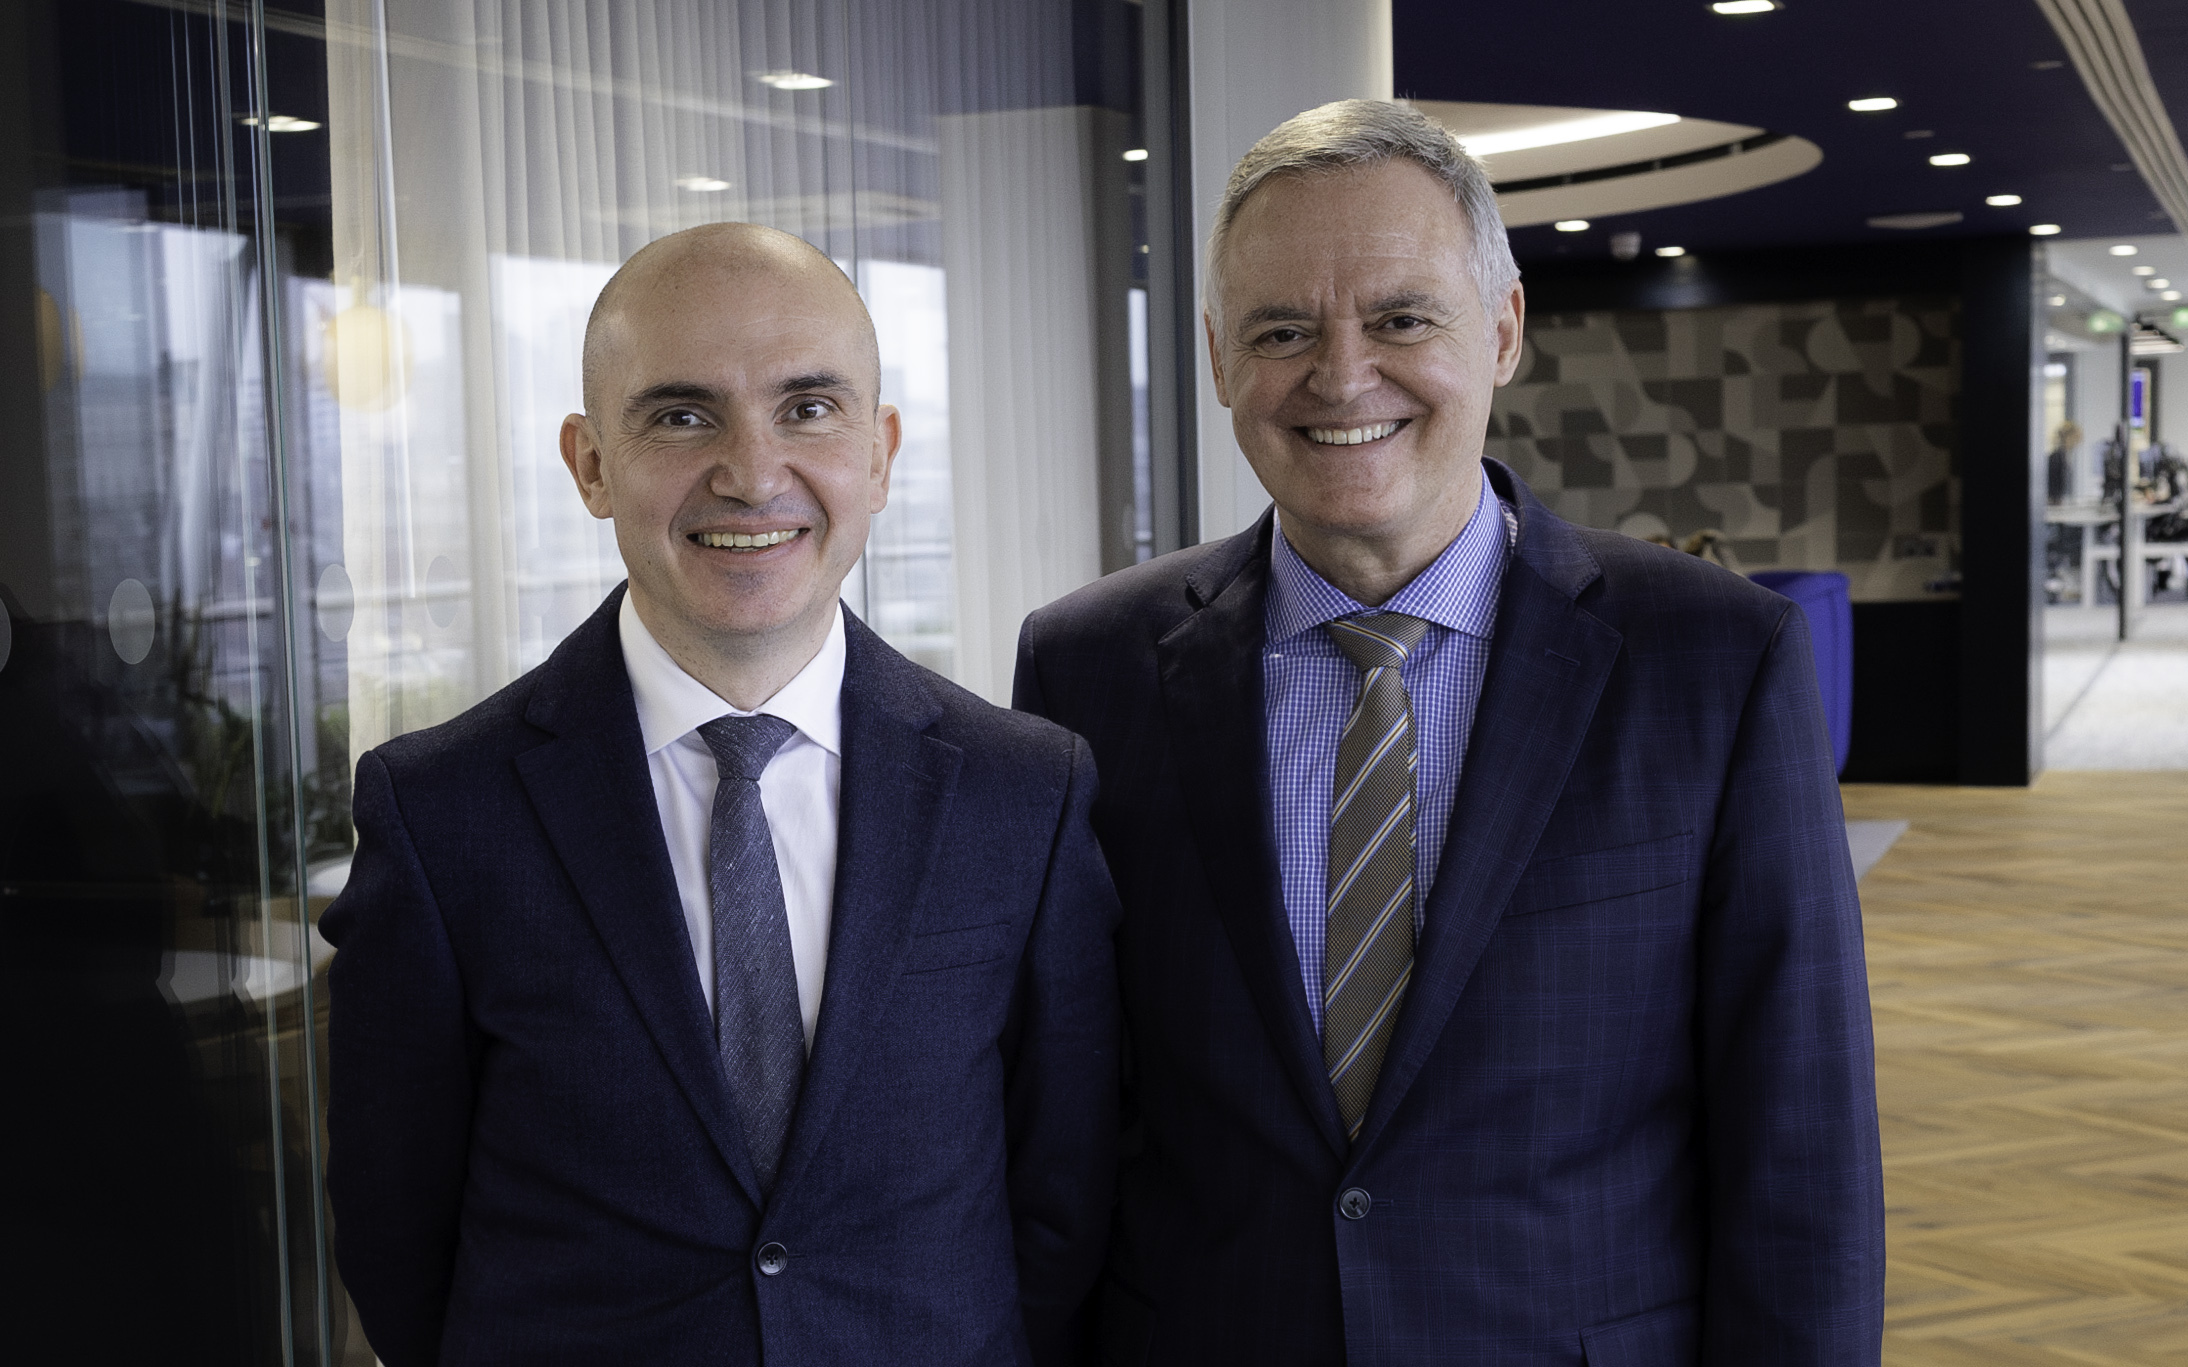 Michael Evans, President and Managing Partner of Cherry and Madano (left) with Jean-Pierre Vasseur, President and CEO of AVENIR GLOBAL.